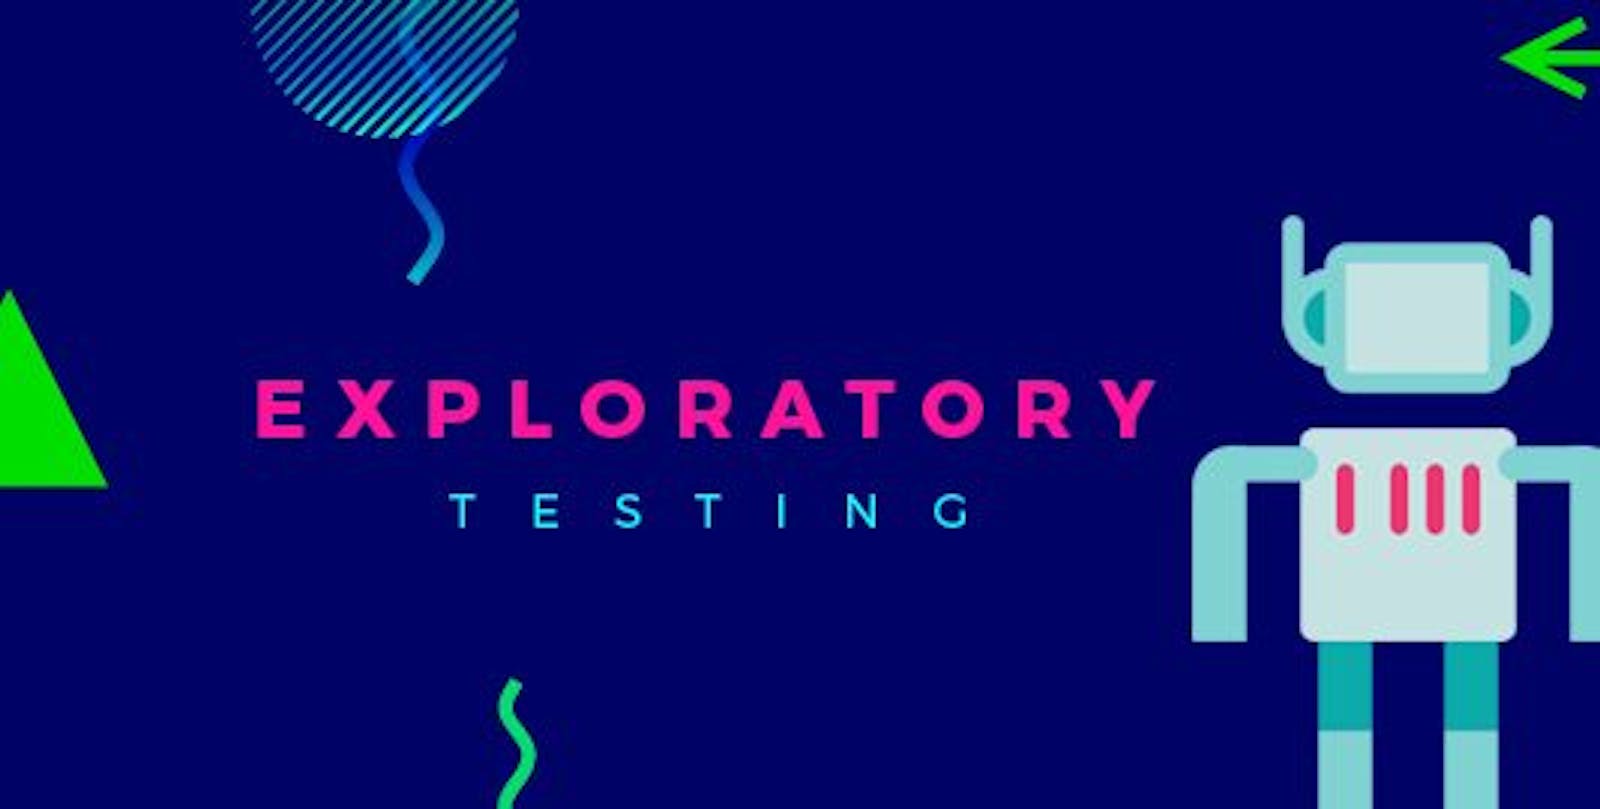 Exploratory Testing: Its All About Discovery